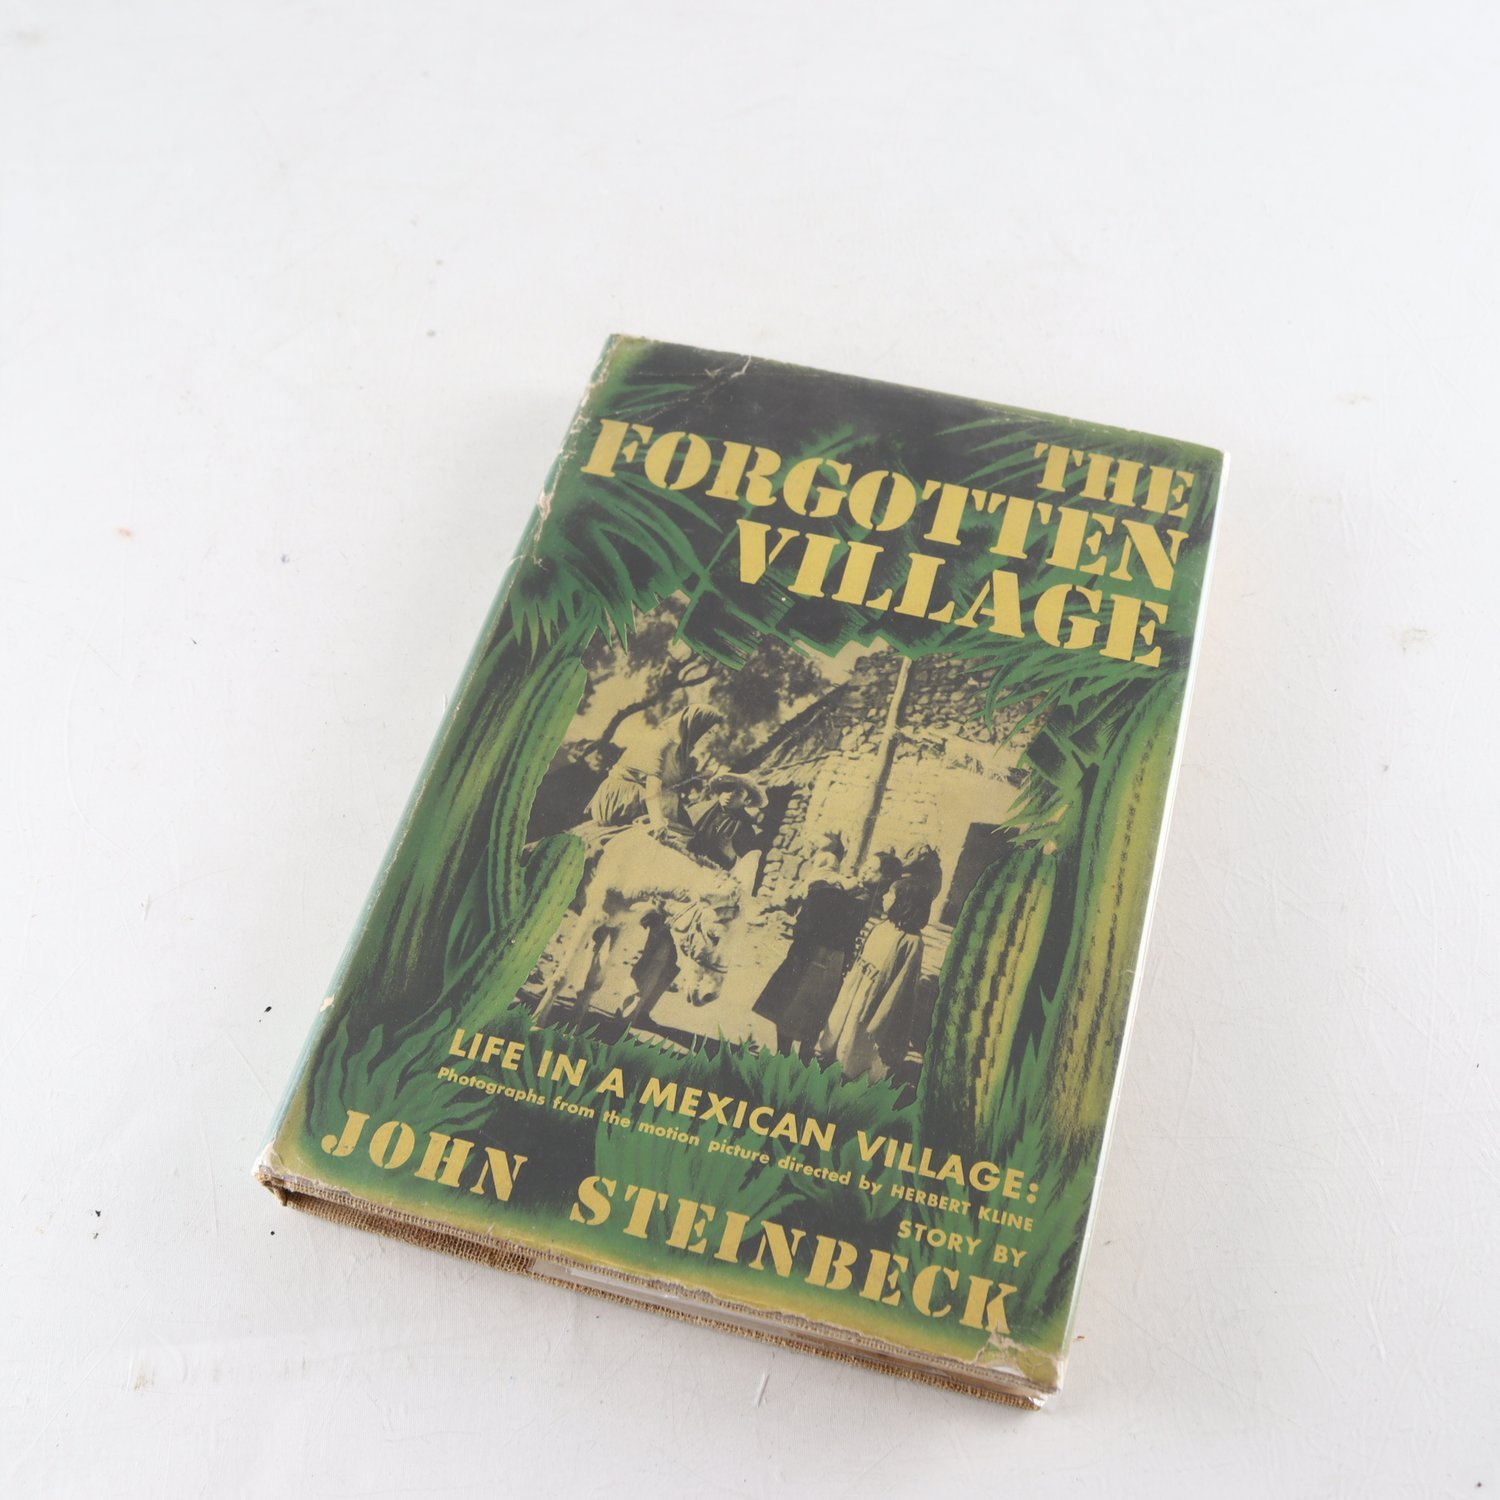 The Forgotten Village, Life in a Mexican village, John Steinbeck